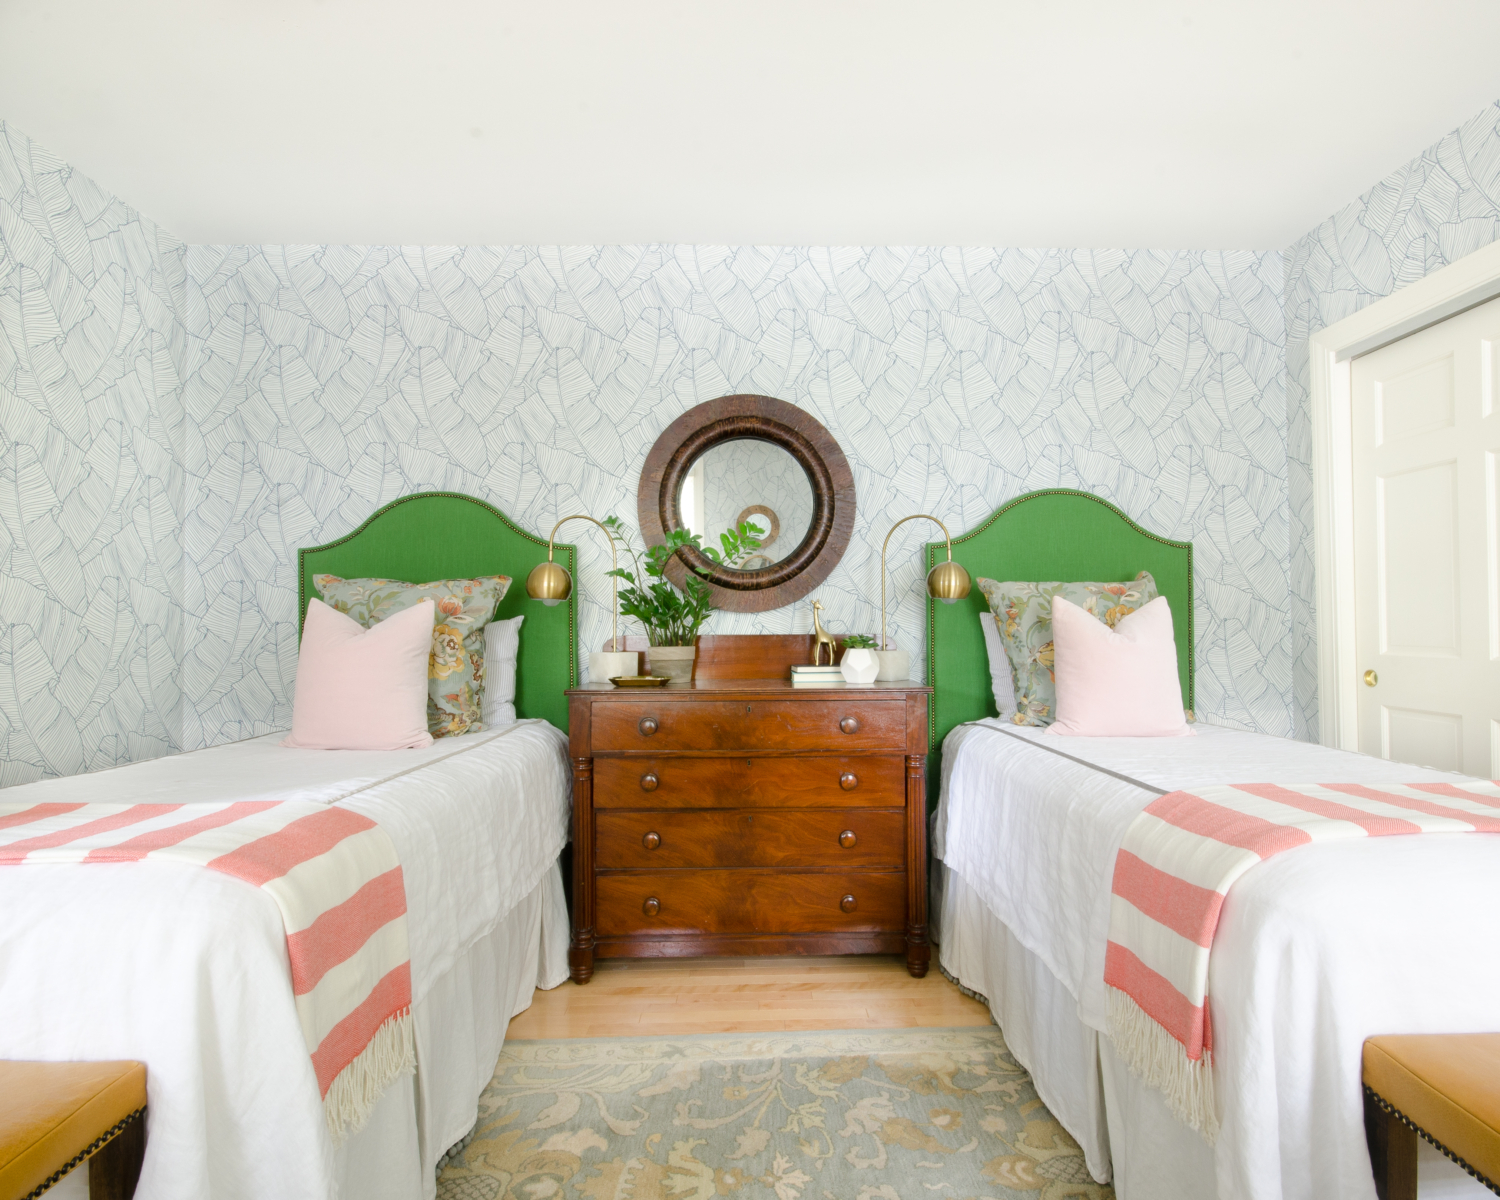 Amazing guest room makeover, you won't even believe the before and after!! Colorful, classic guest room with teal, coral, blush, kelly green, and white. Budget-conscious and lots of amazing DIY projects!